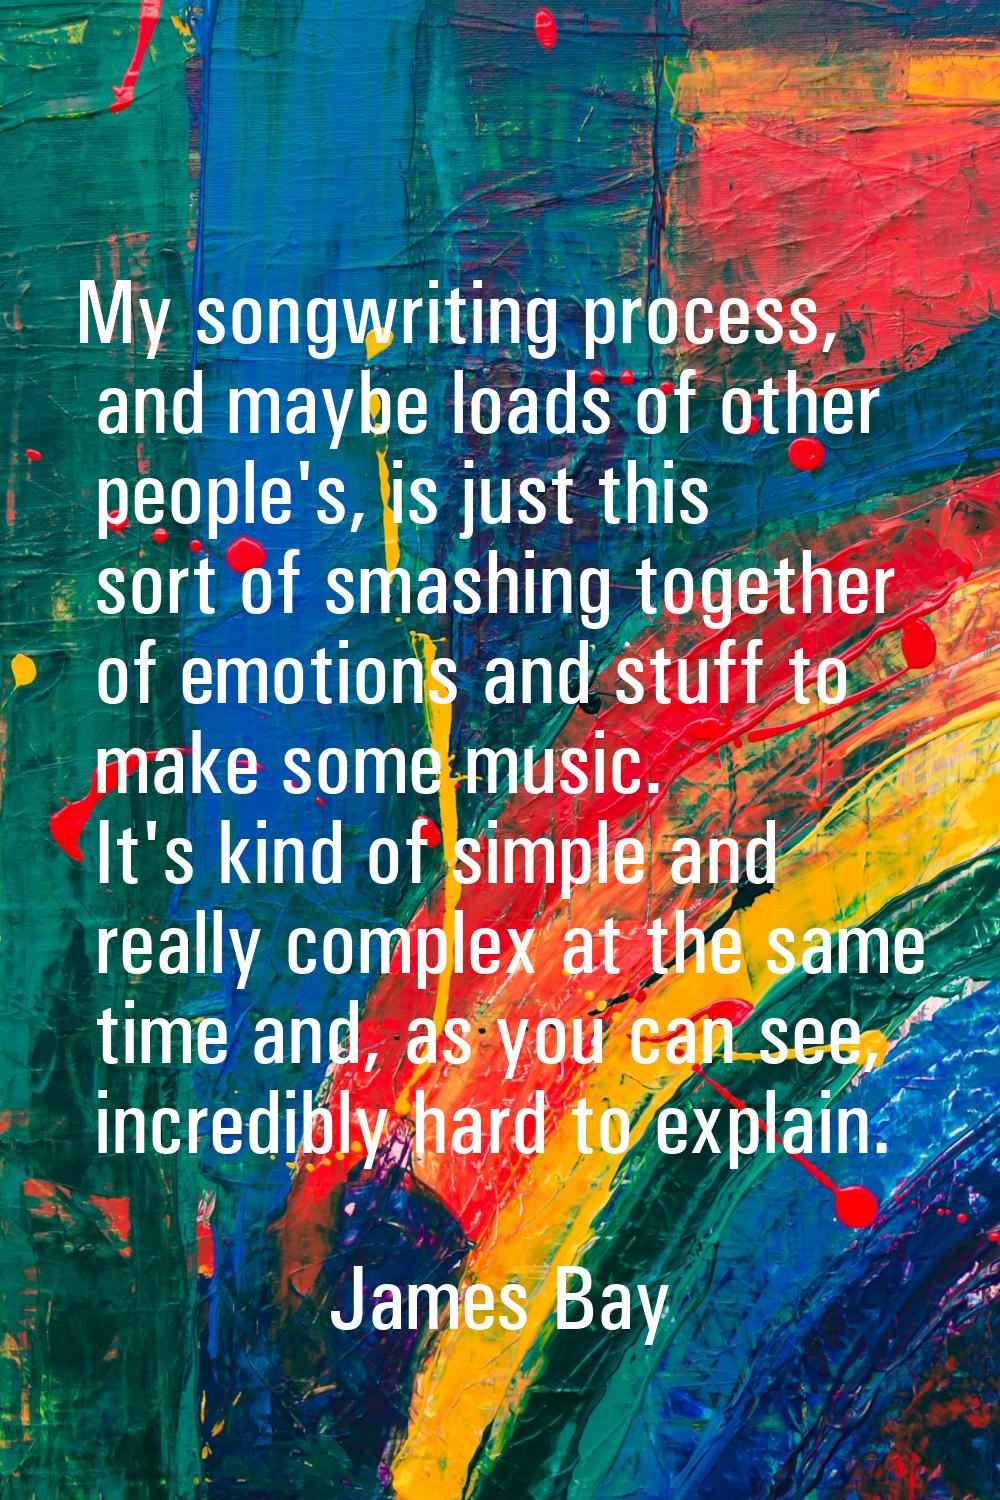 My songwriting process, and maybe loads of other people's, is just this sort of smashing together o